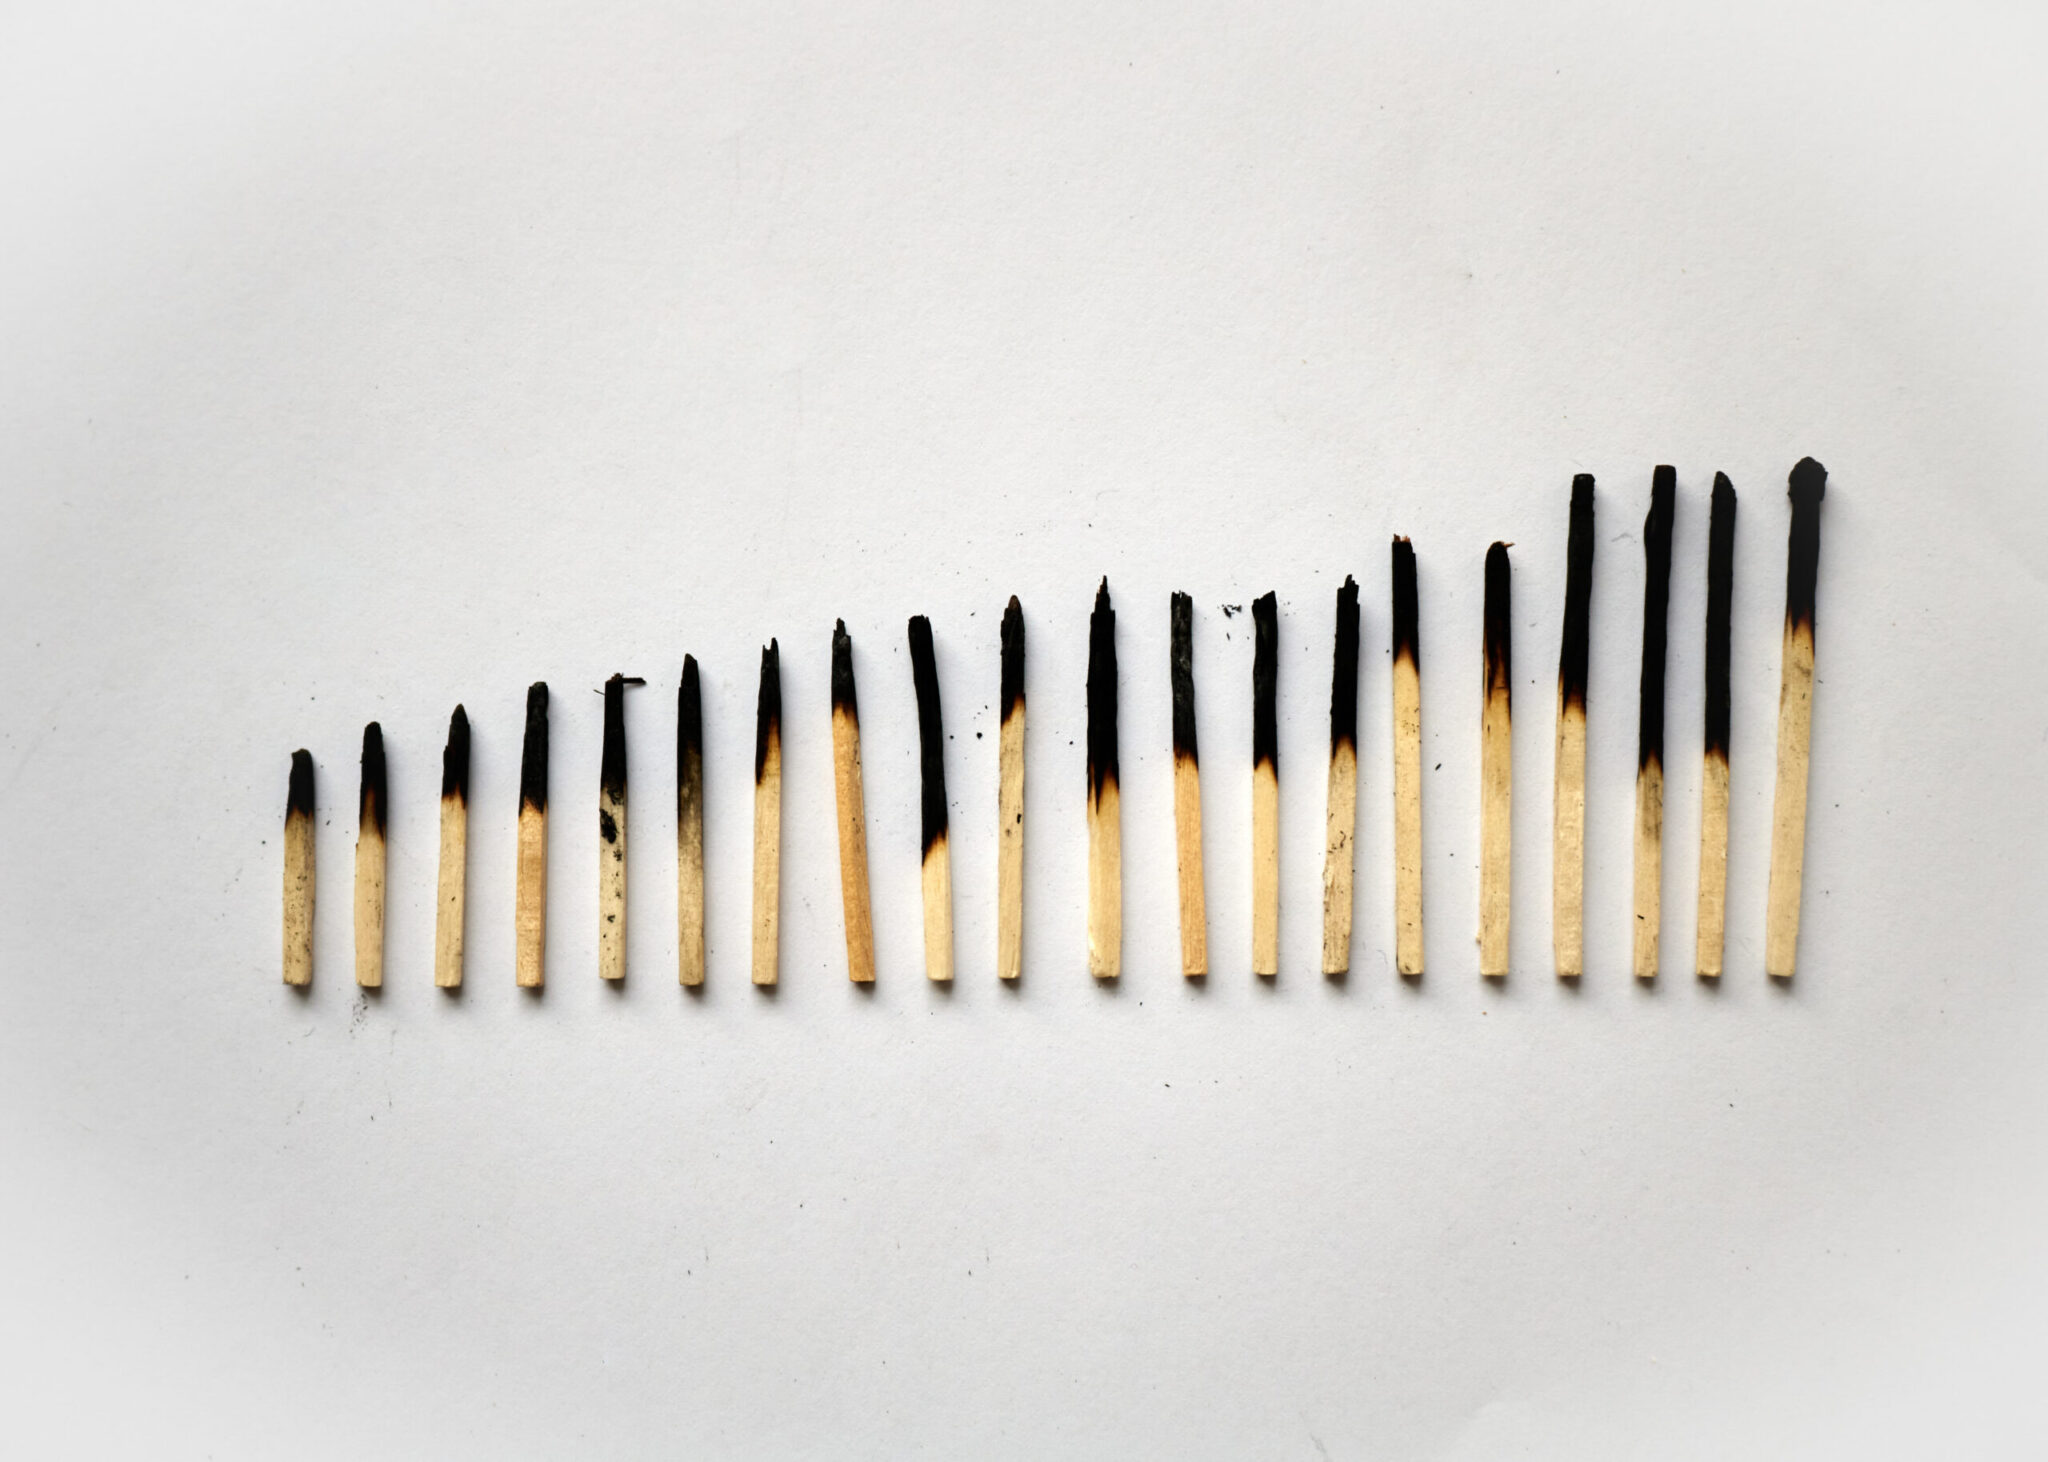 20 matchsticks that have been lit and charred at one end are aligned in order of height. On the left is the shortest charred match and on the right is the longest. The background is bright white and contrasts greatly with the blackness of the charring.